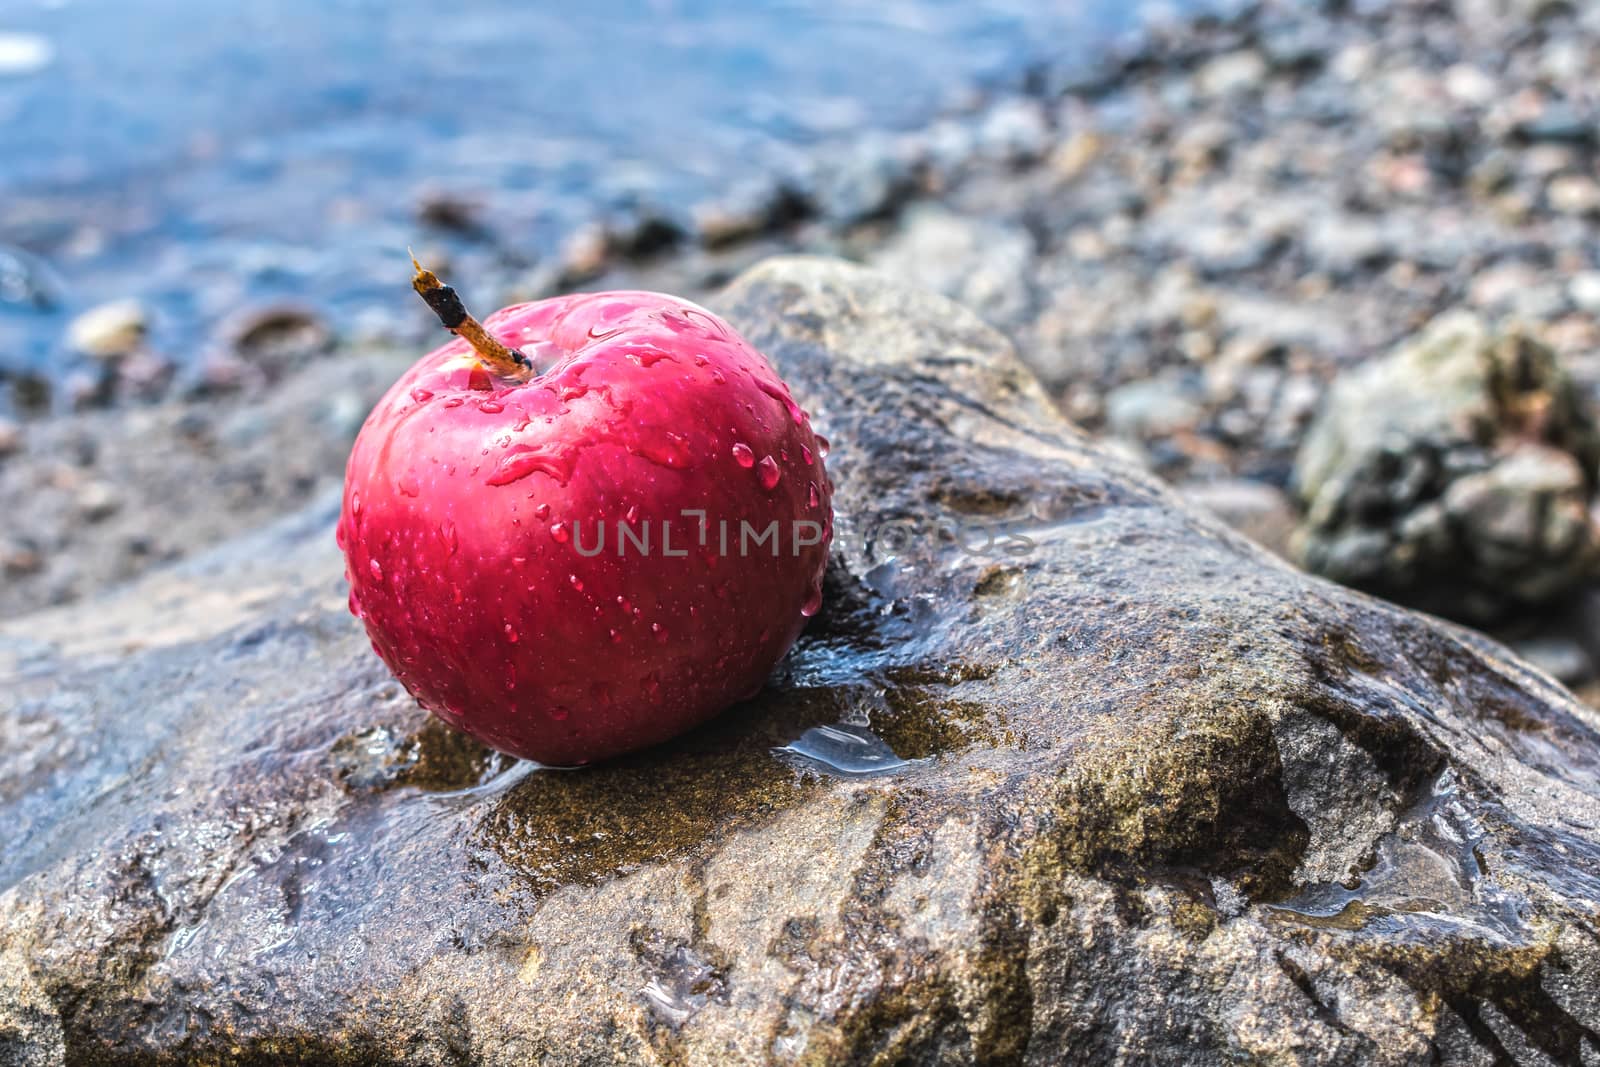 A ripe and juicy red apple lies on a stone on the river bank